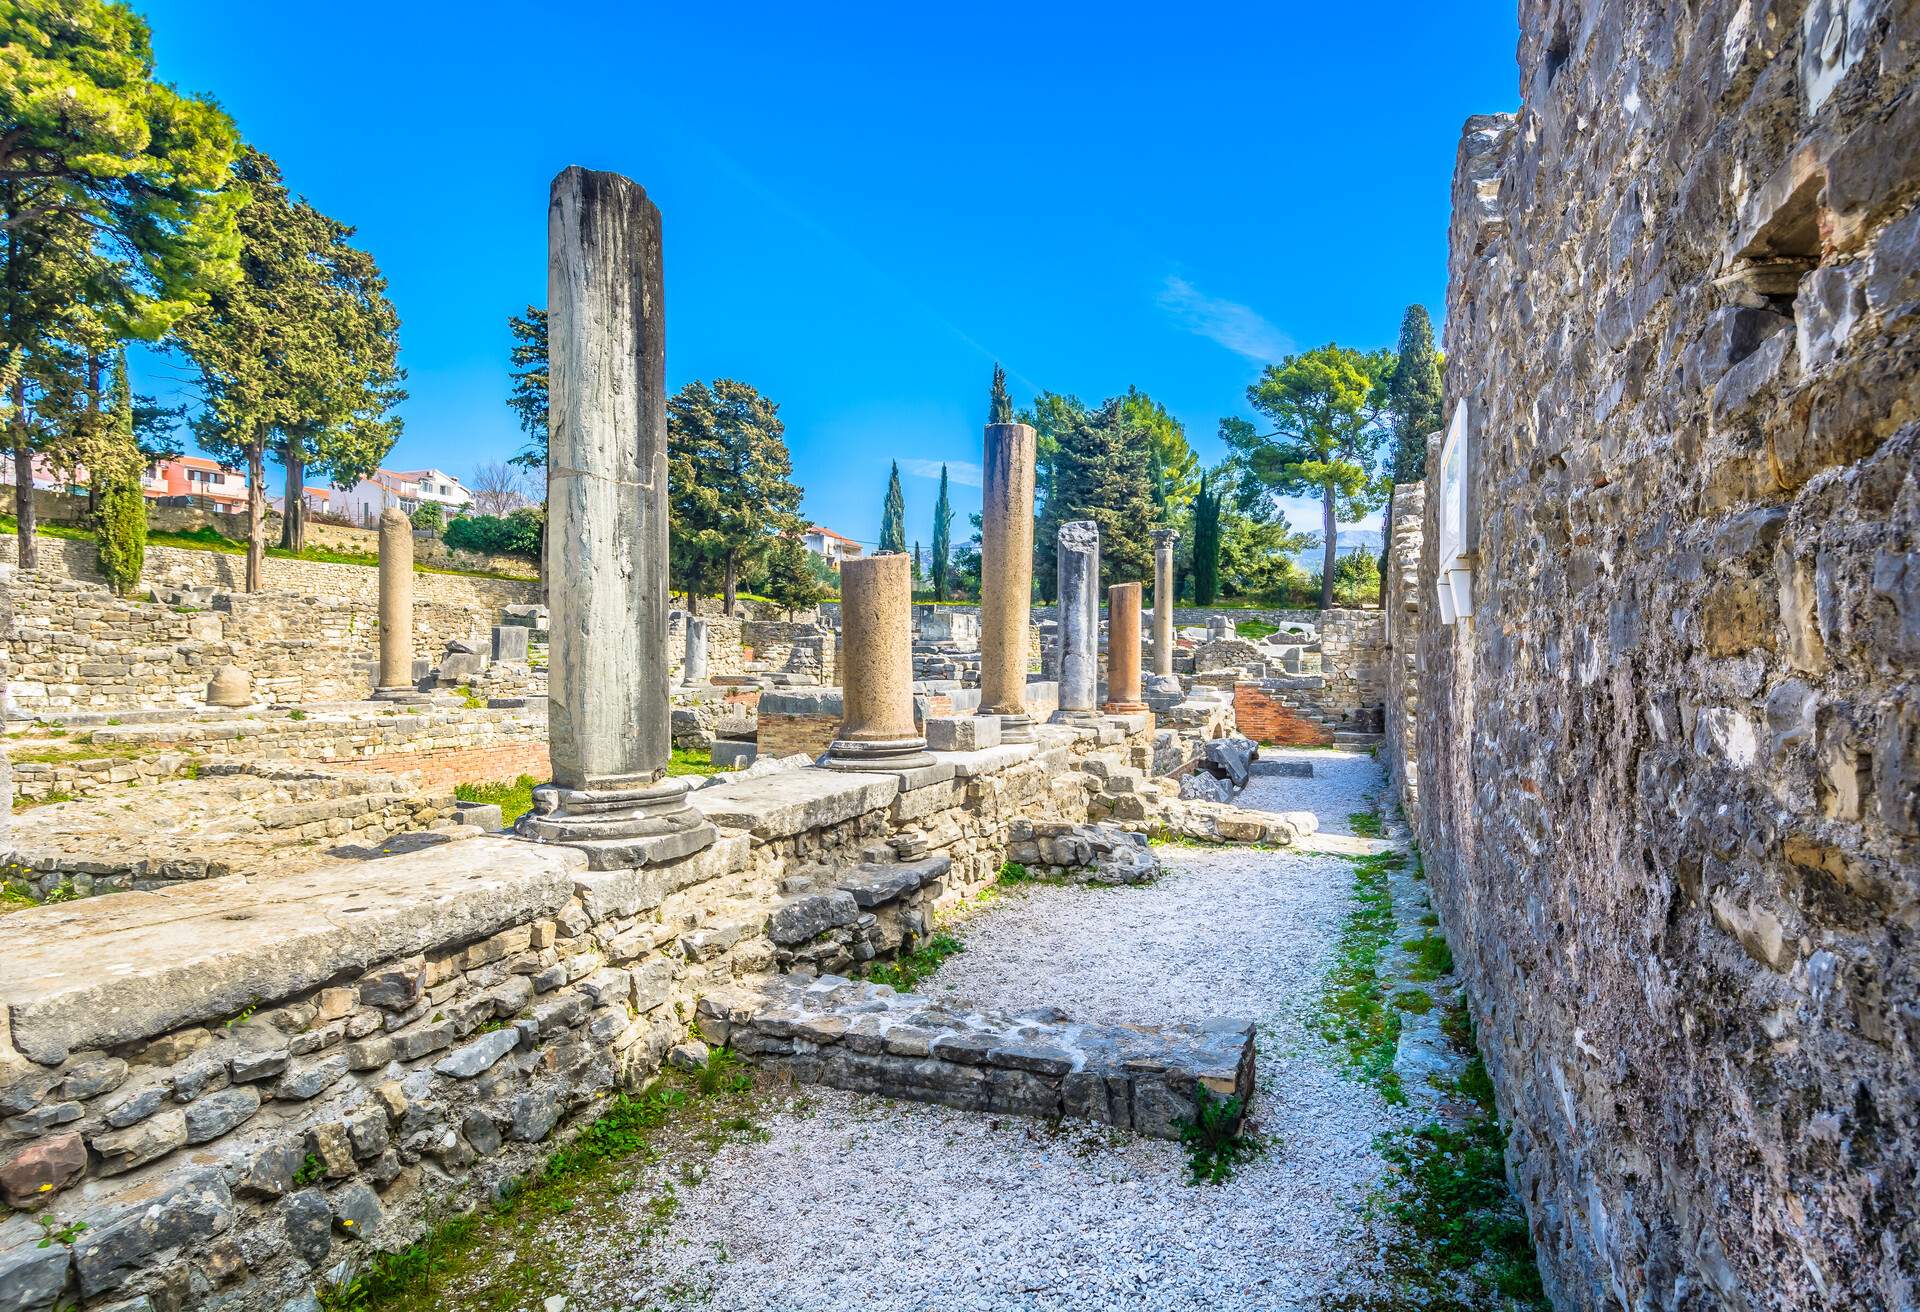 Scenic view at old outdoors public ruins of ancient roman city Salona in suburb of town Split, Croatia.